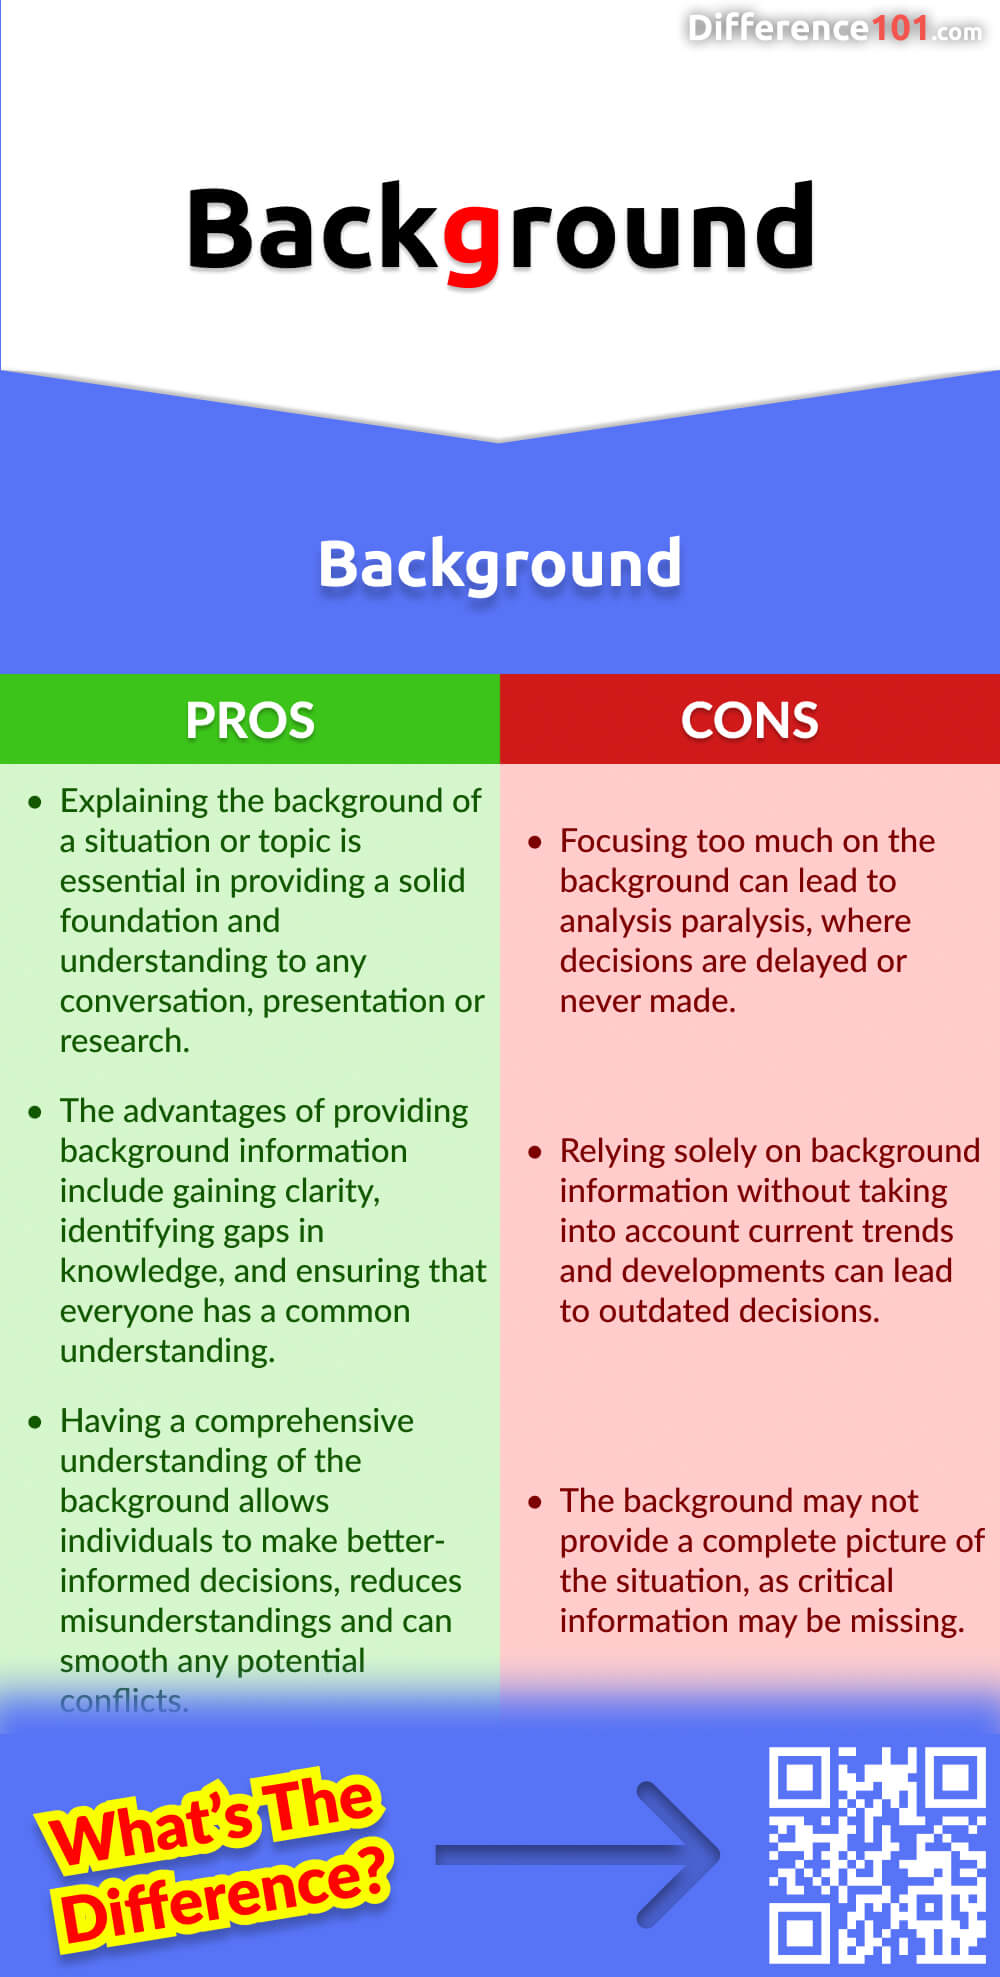 Background Pros & Cons